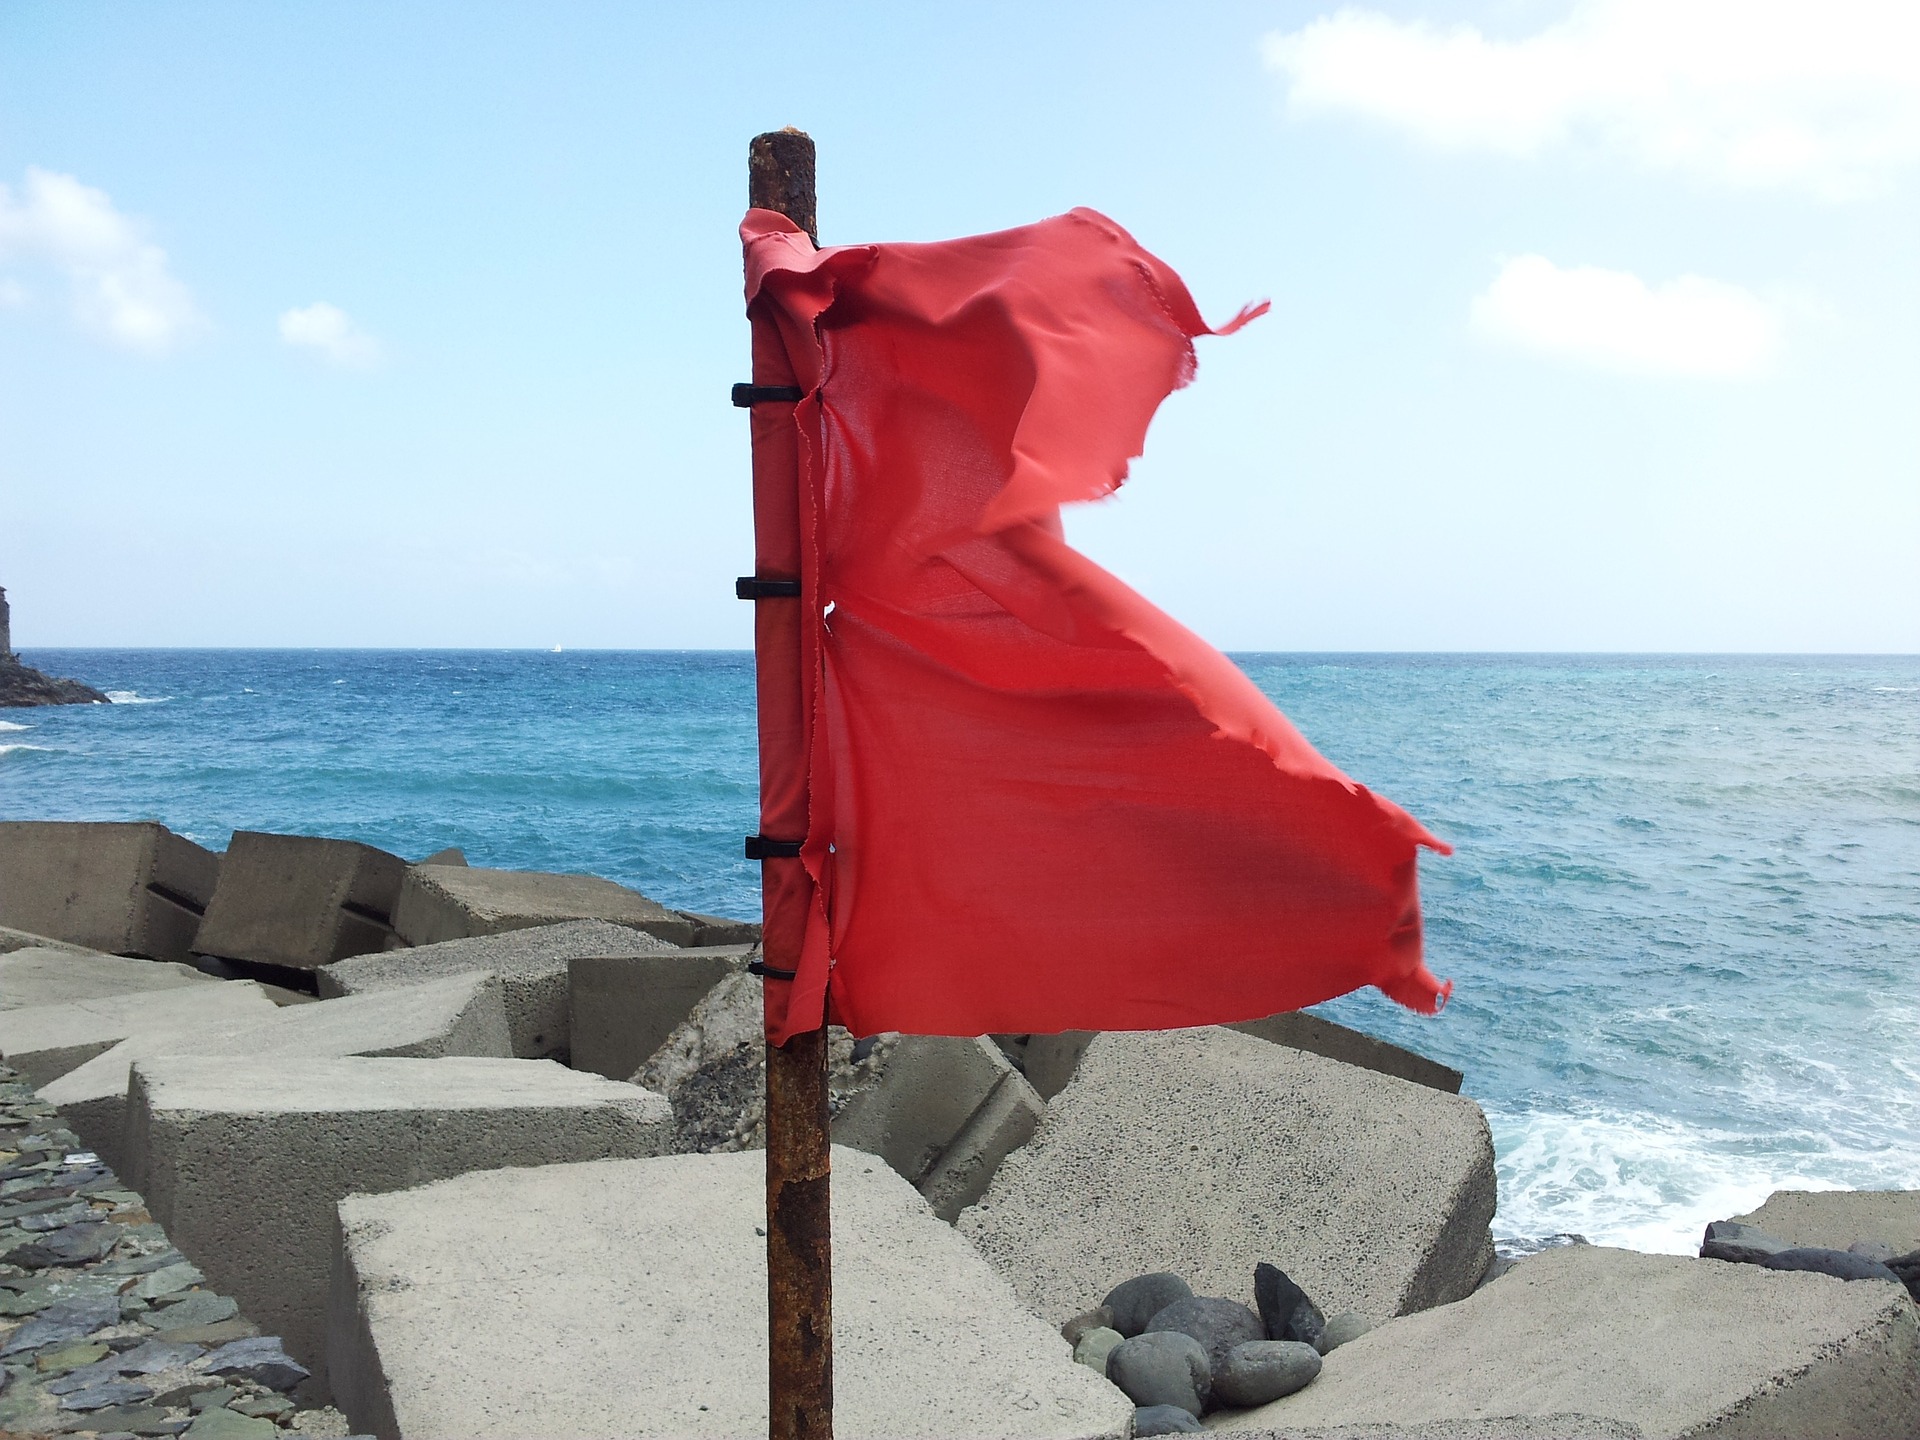 Startup due diligence: how to spot red flags – part 2